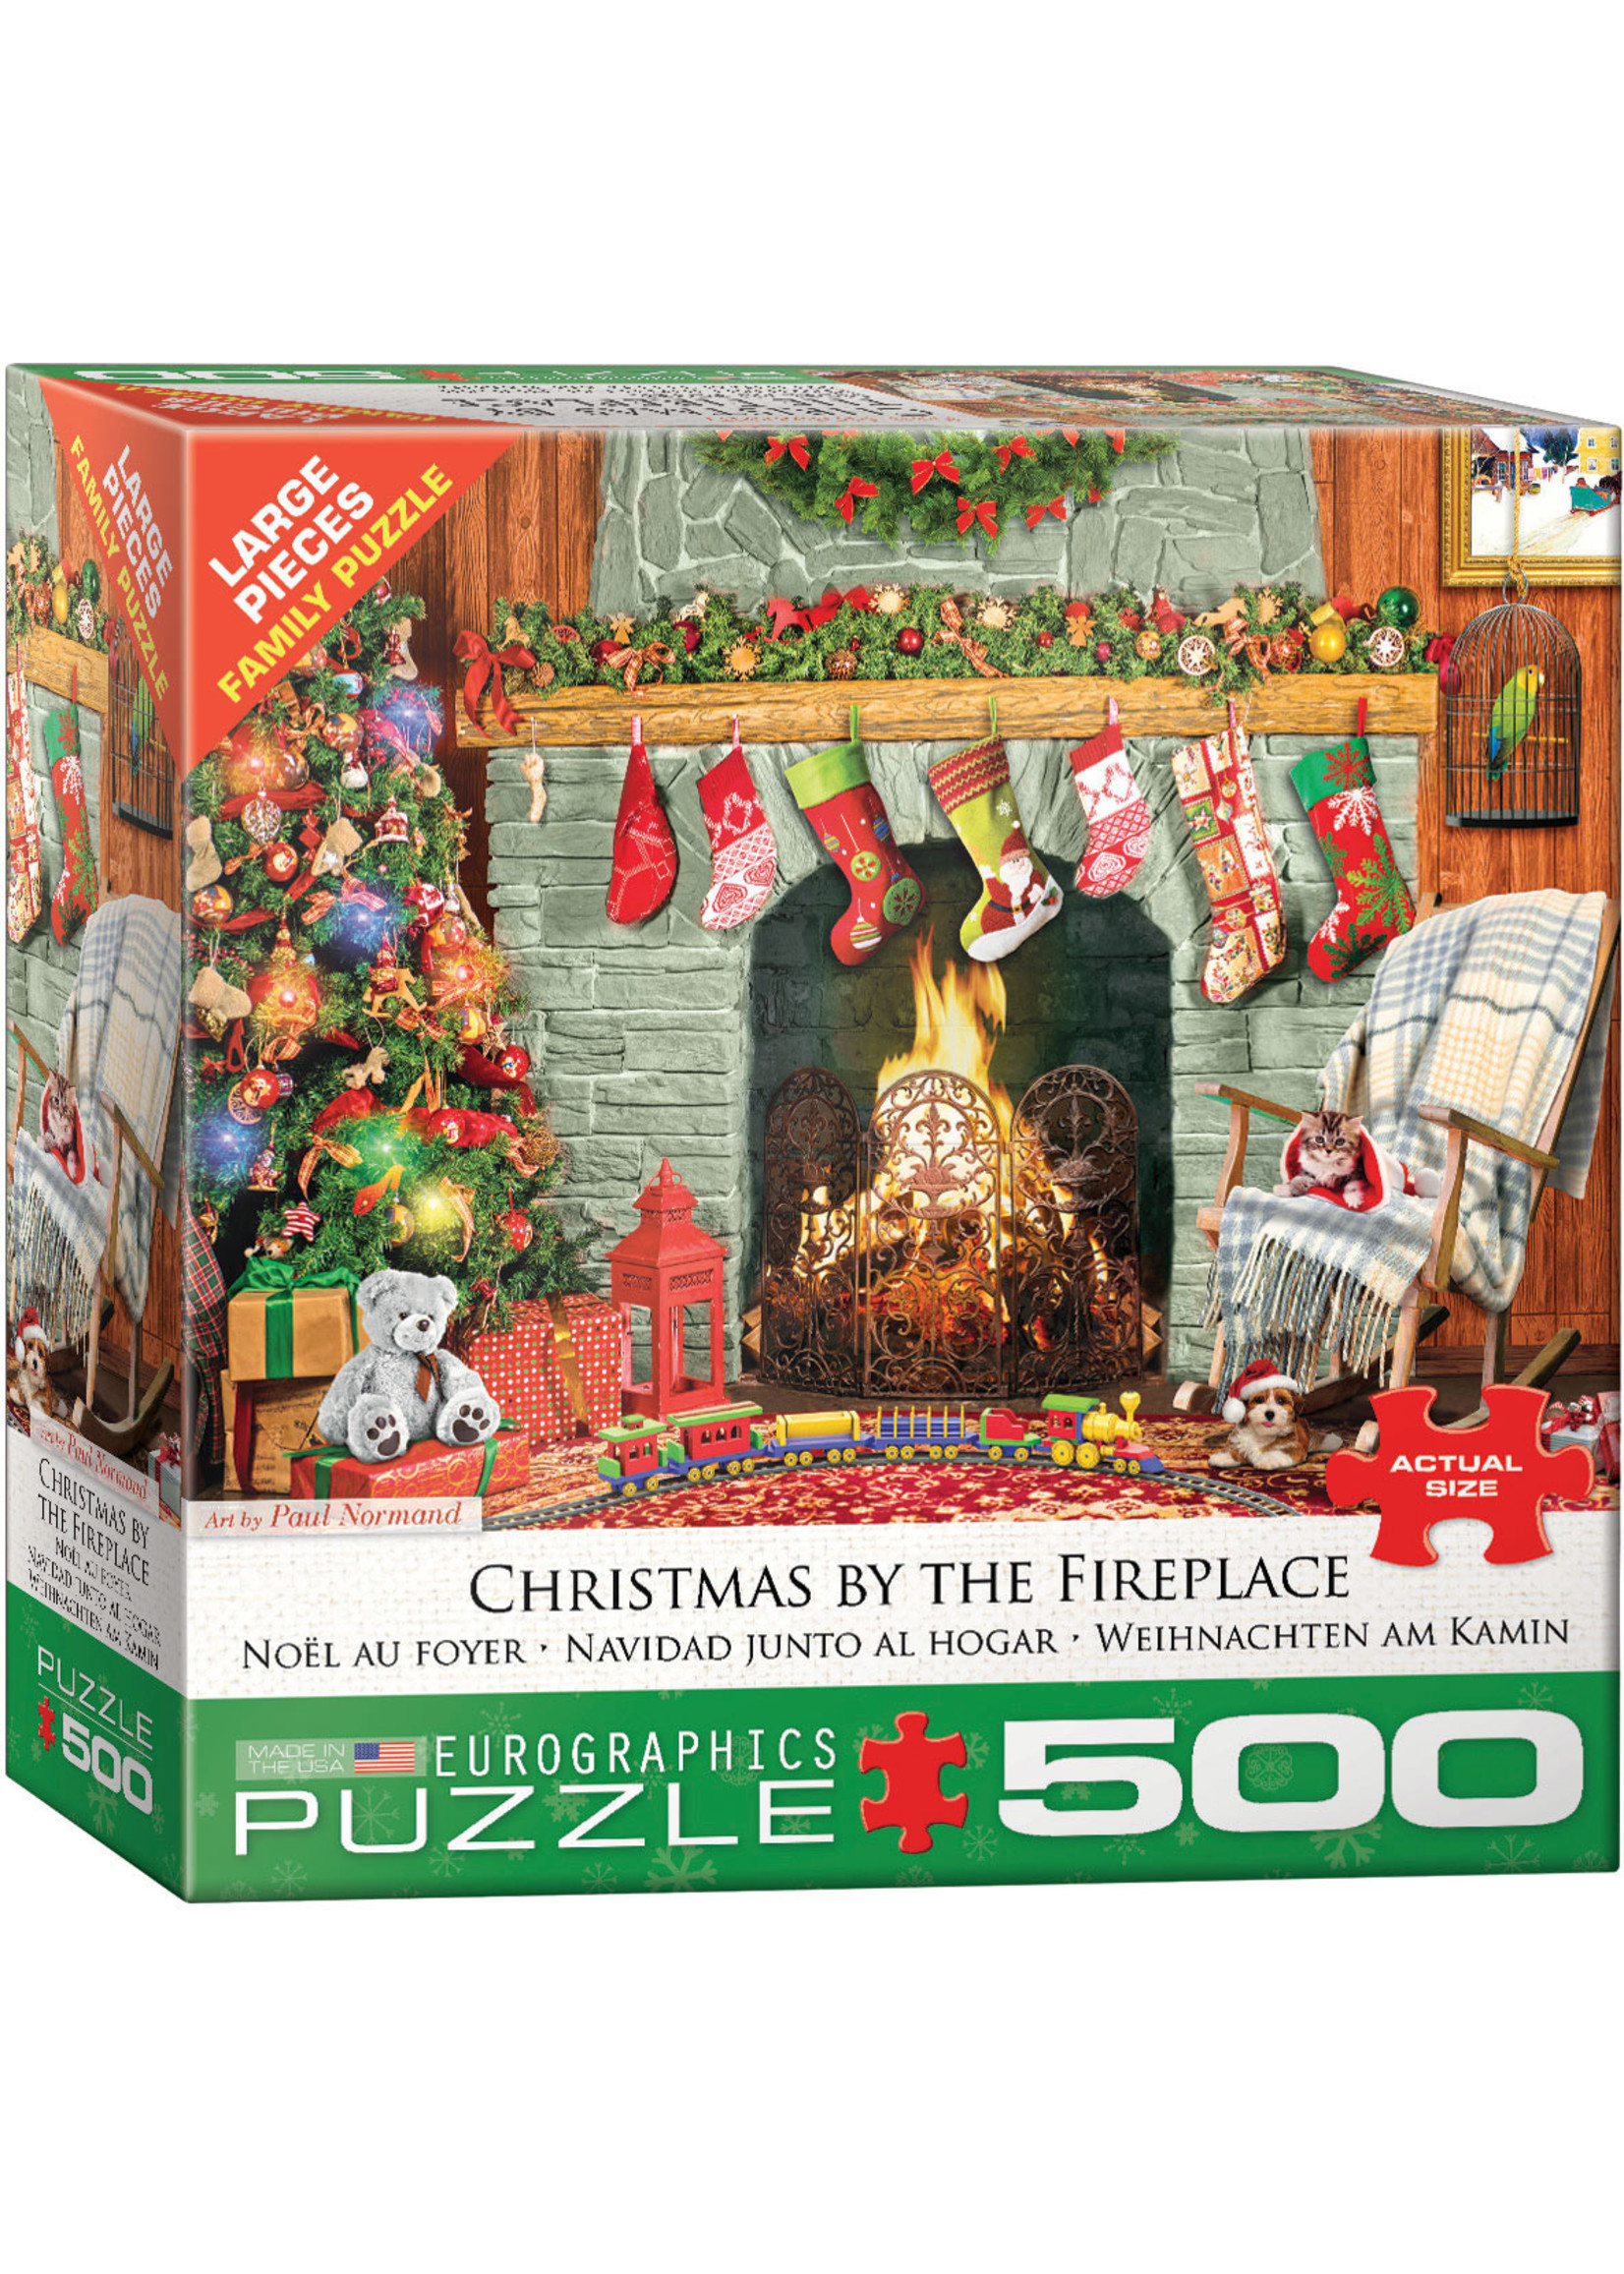 Eurographics Christmas by the Fireplace - 500 Piece Puzzle